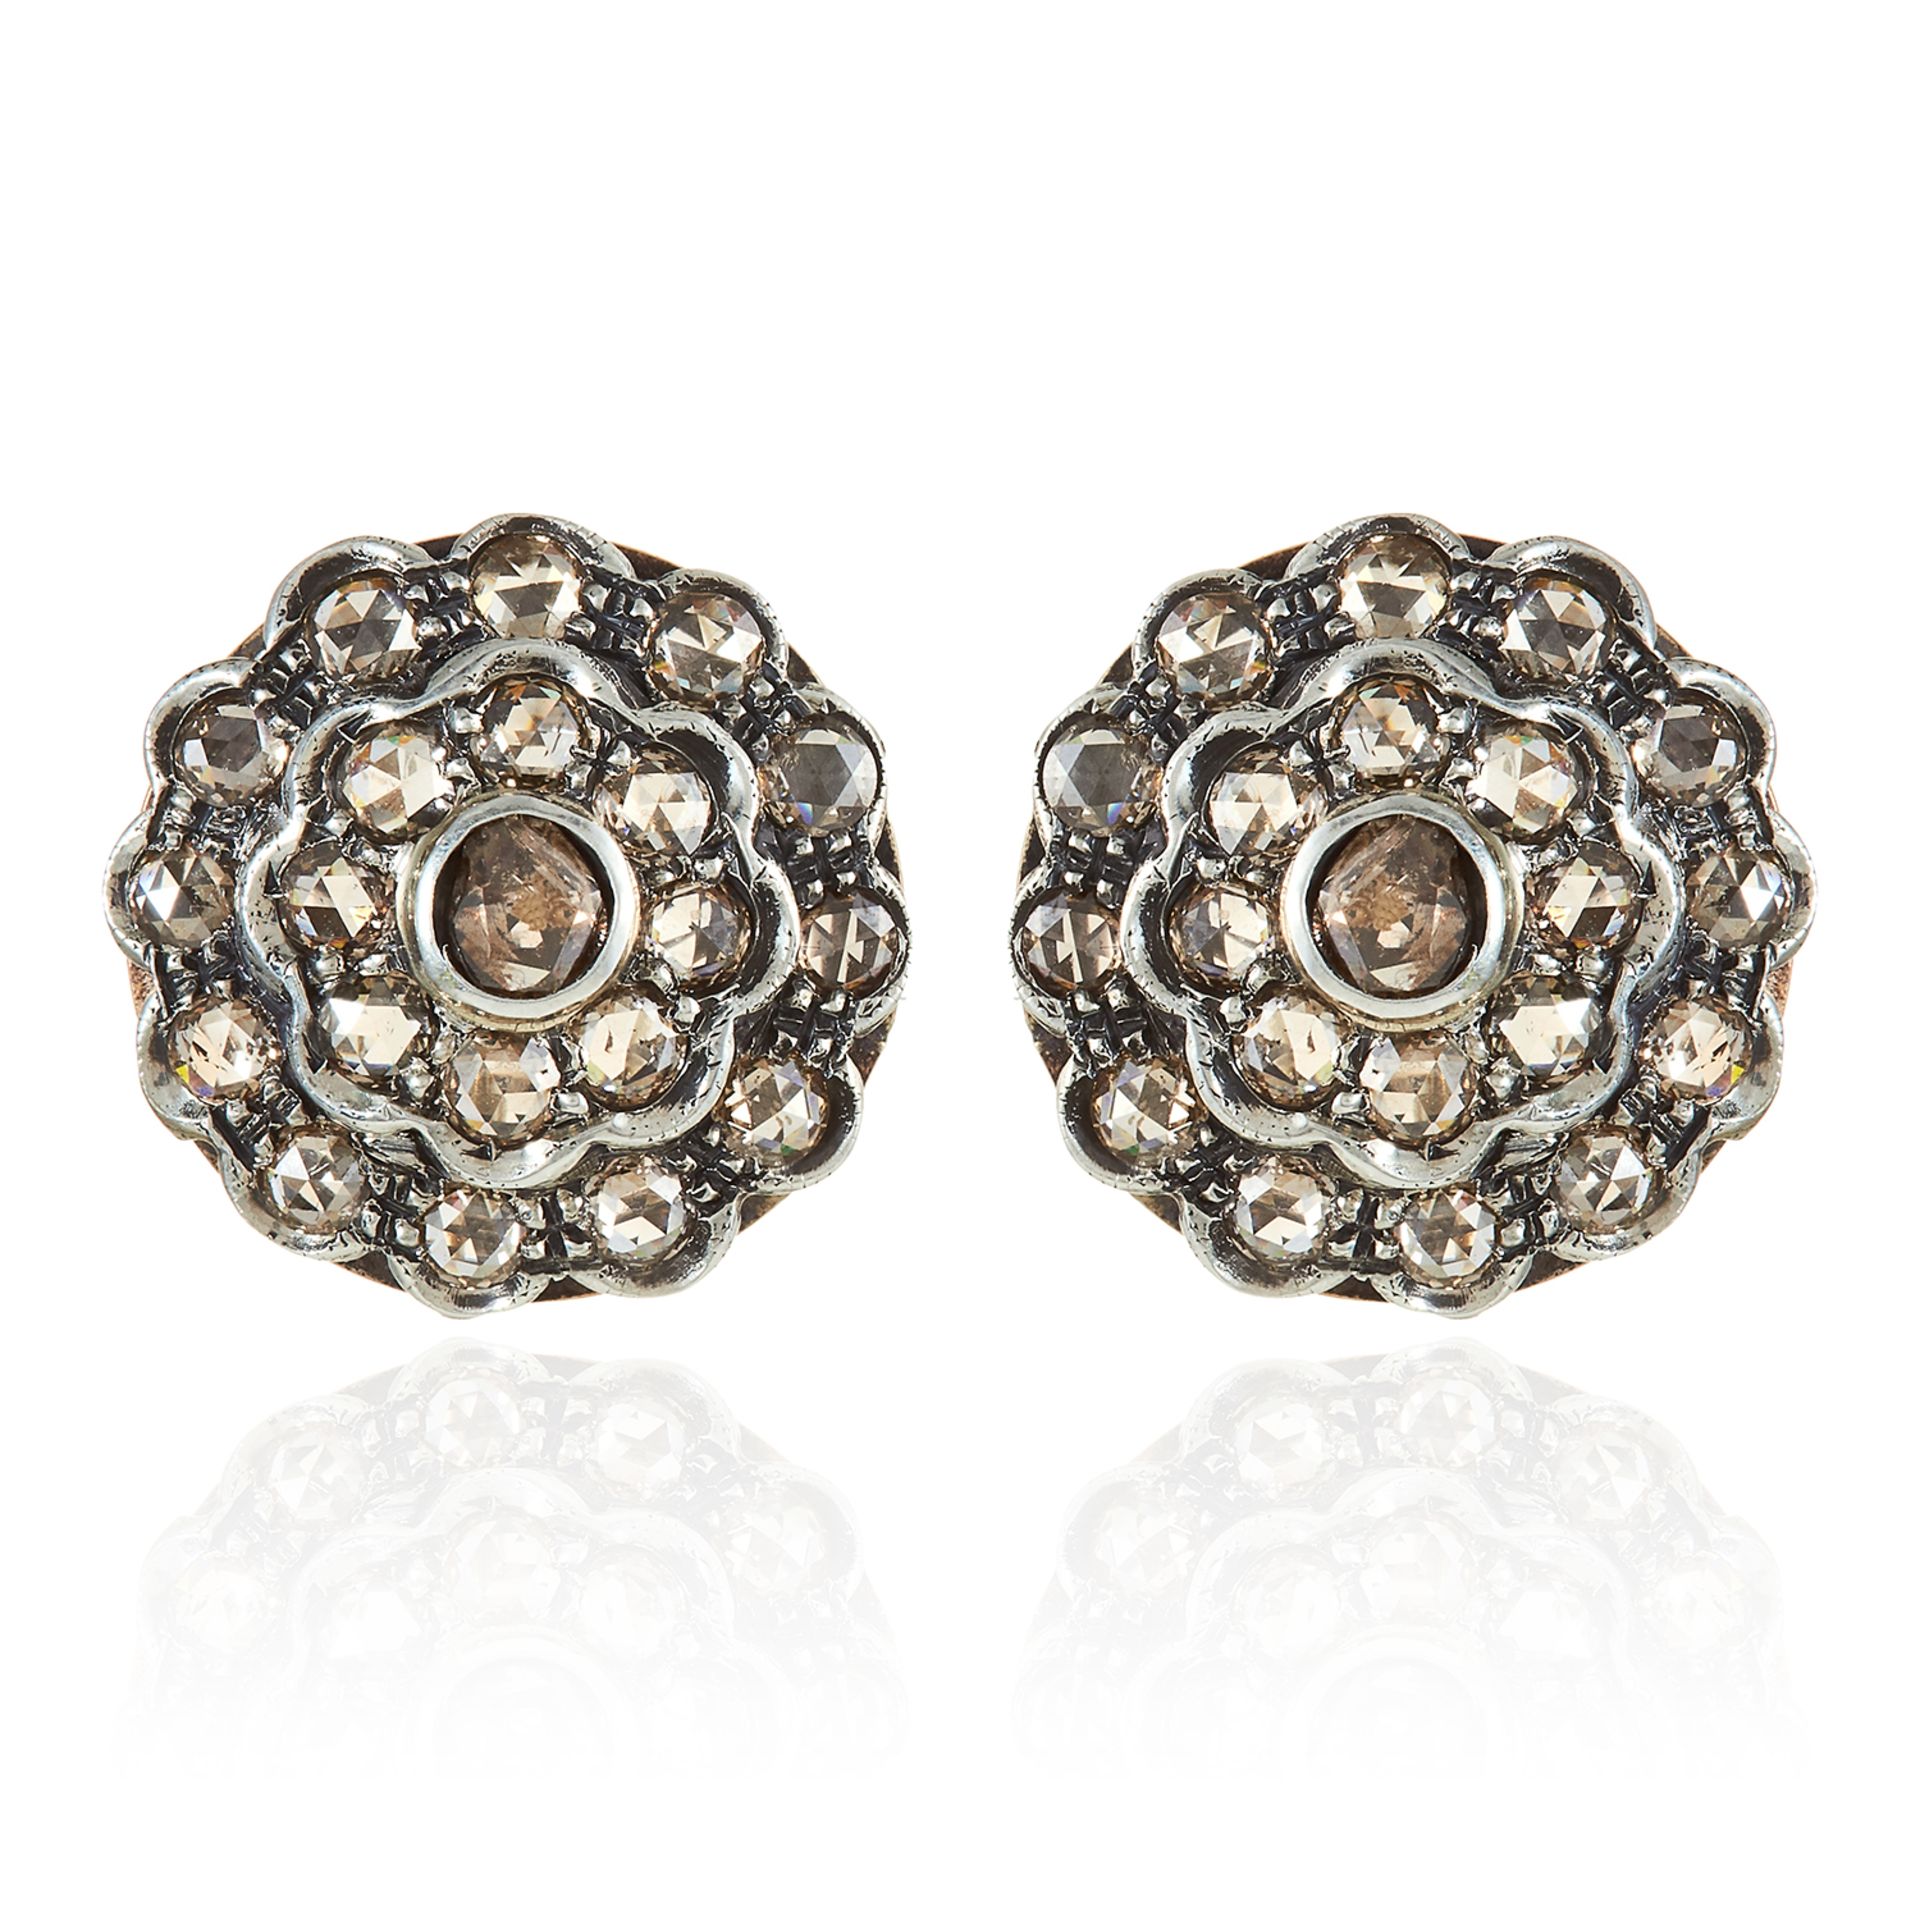 A PAIR OF DIAMOND CLUSTER EARRINGS in yellow gold and silver, formed of concentric rows of rose